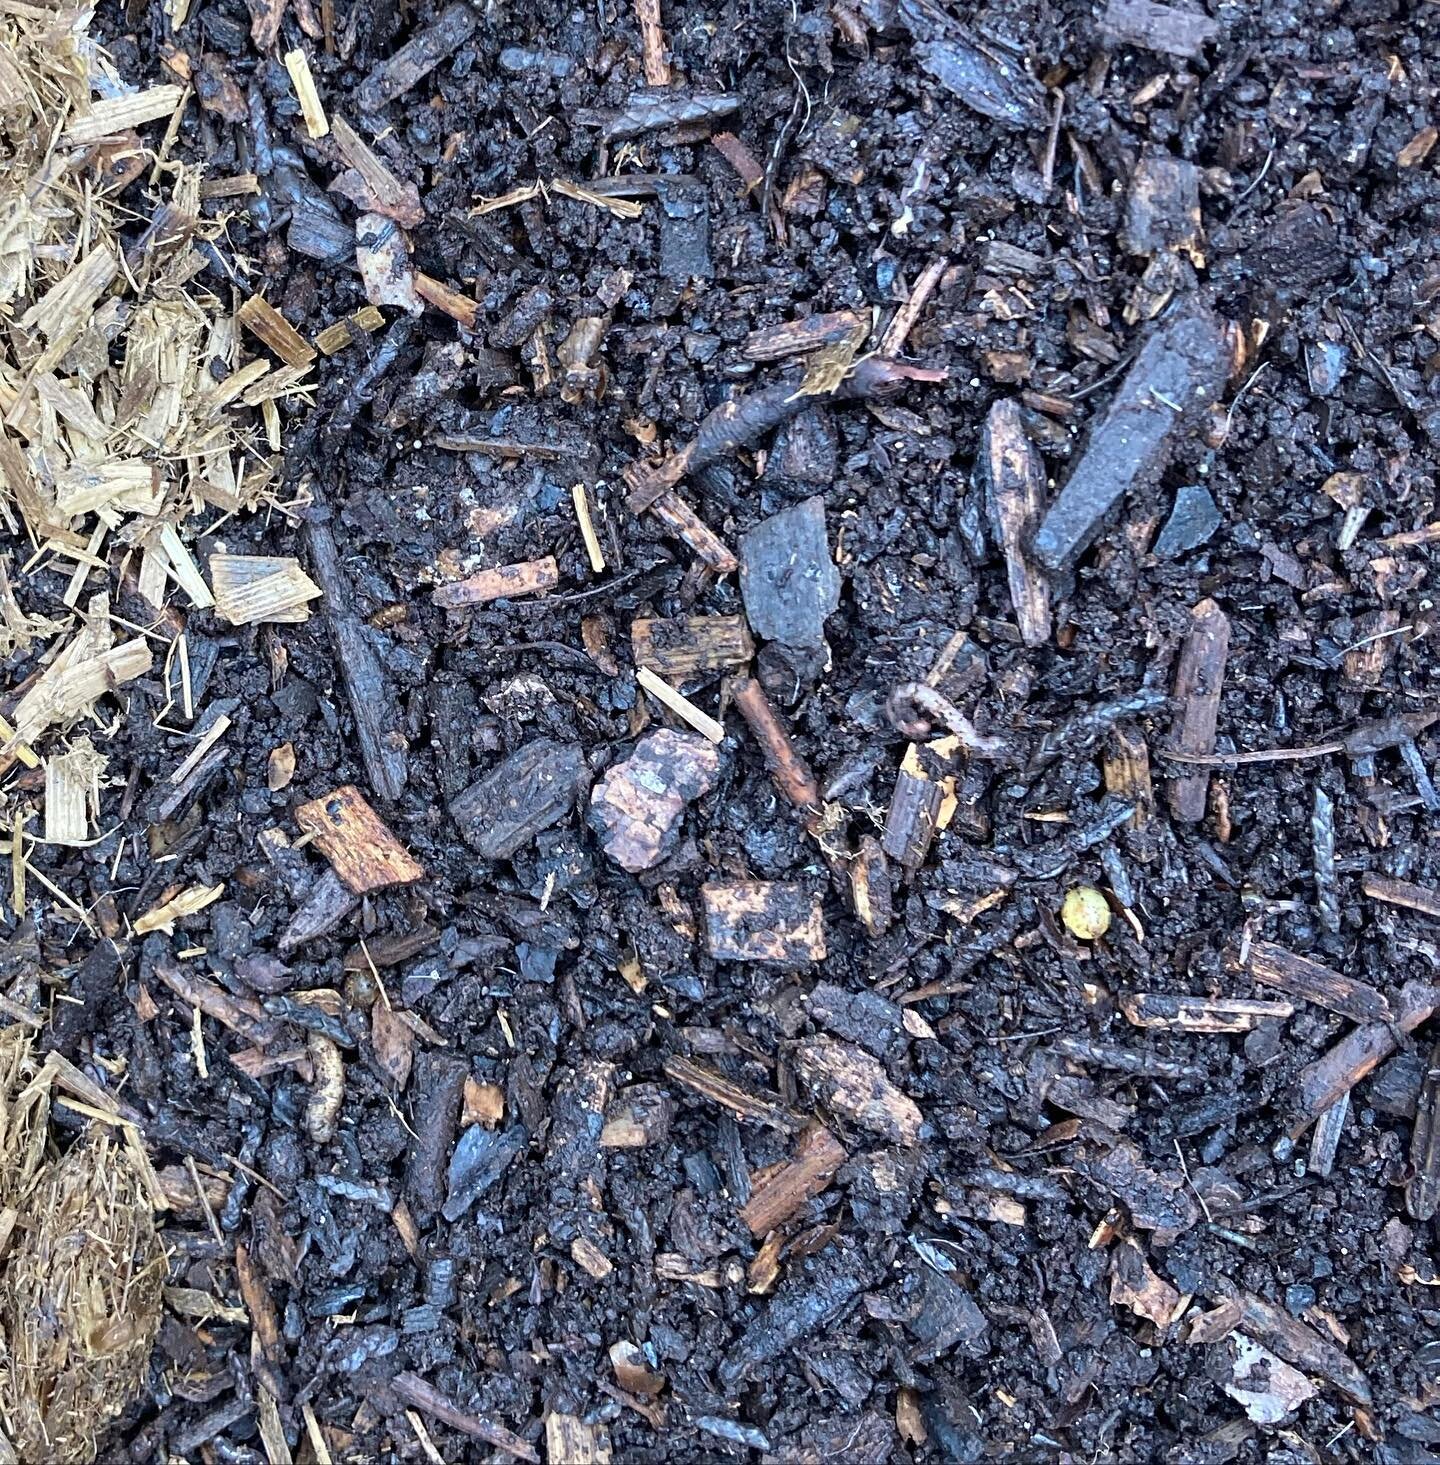 Loving looking close up into this compost from @compost.club - can you spot worms, worm eggs, microbe charged biochar, microarthropods? Packed full of life it will give a huge nutritional and microbe boost to the soil around the hellebores, geranium,